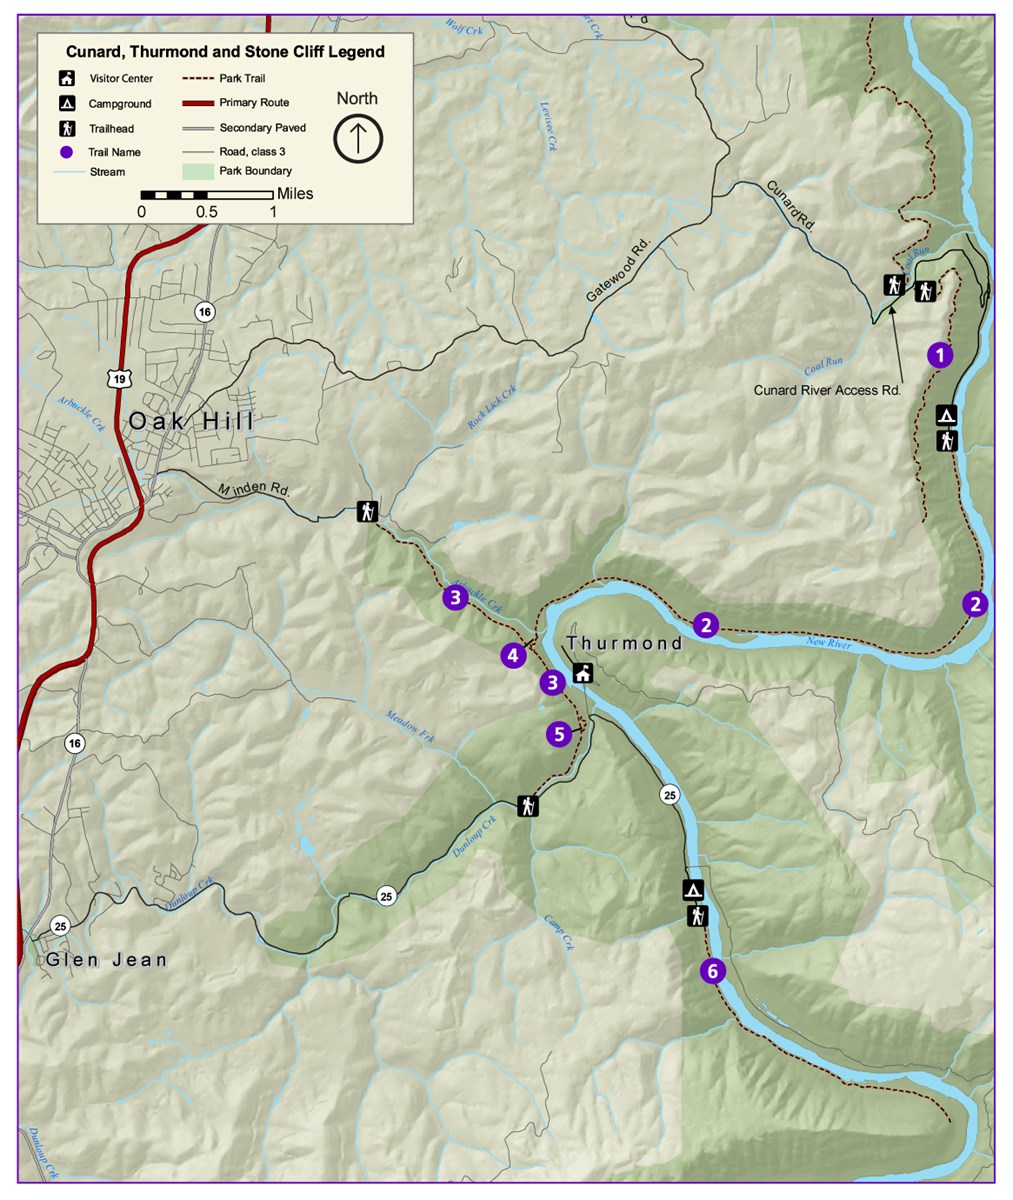 Map of the trails in Thurmond, Cunard, and Stone Cliff